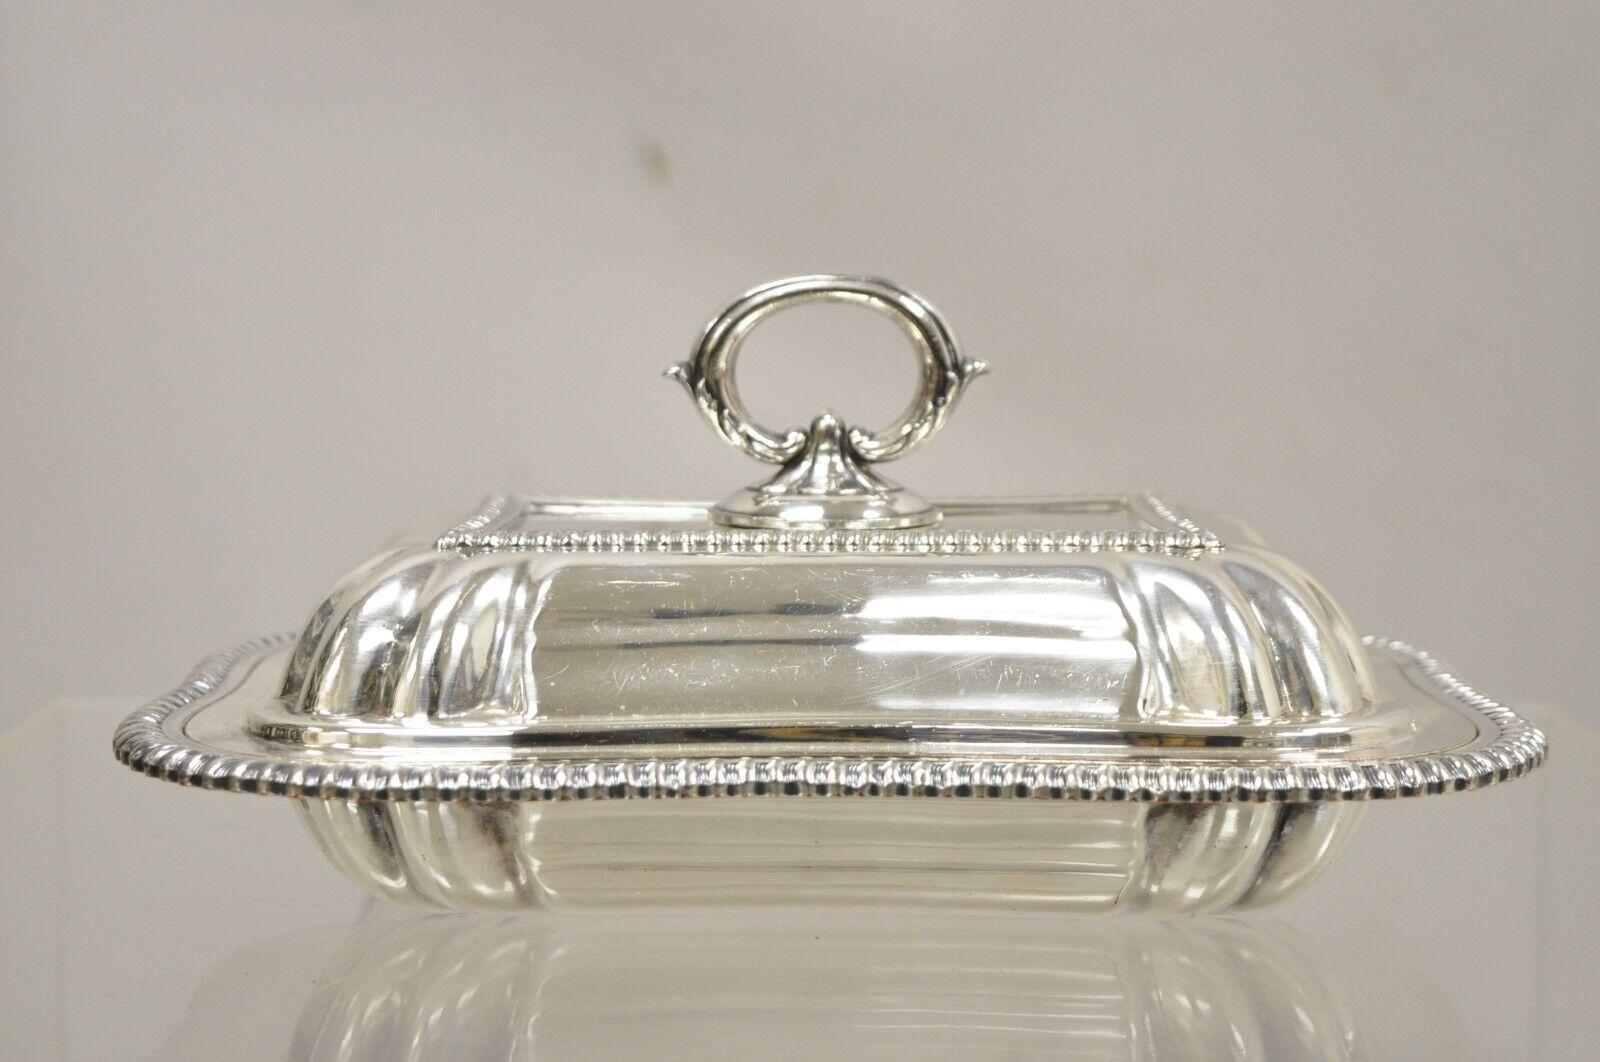 Vintage English Regency Style Silver Plated Lidded Vegetable Serving Platter Dish. Circa Mid 20th Century. Measurements:  4.5